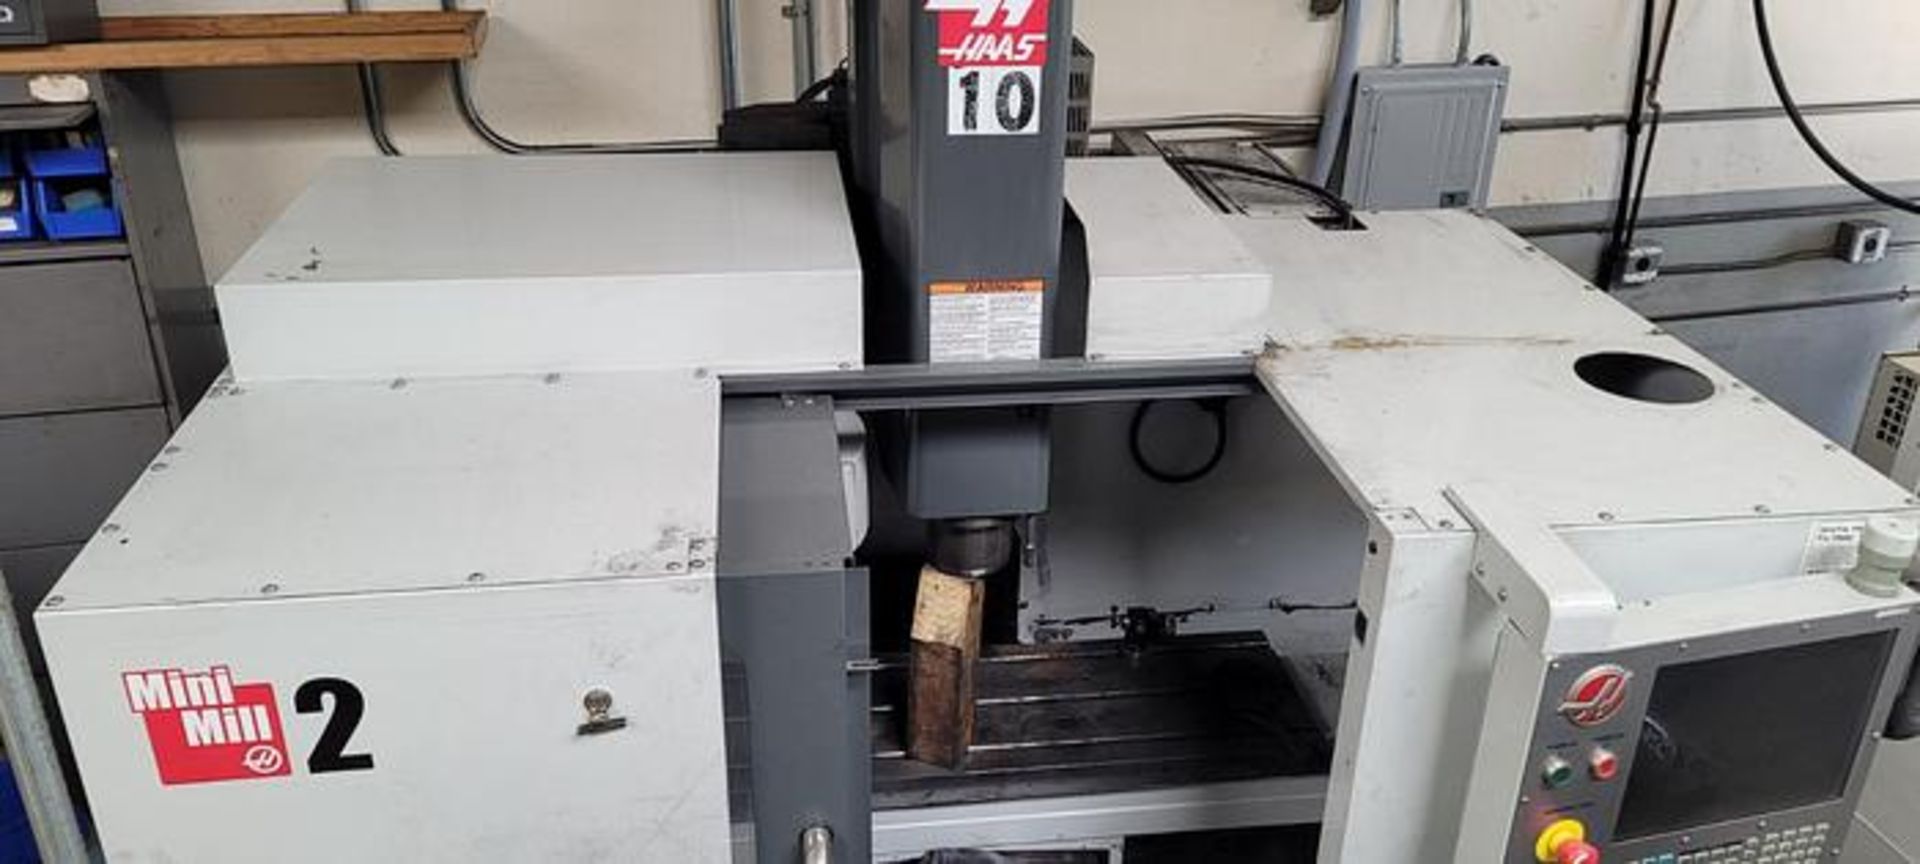 2012 HAAS Mini Mill 2 4-Axis CNC Vertical Machining Center - Image 2 of 3